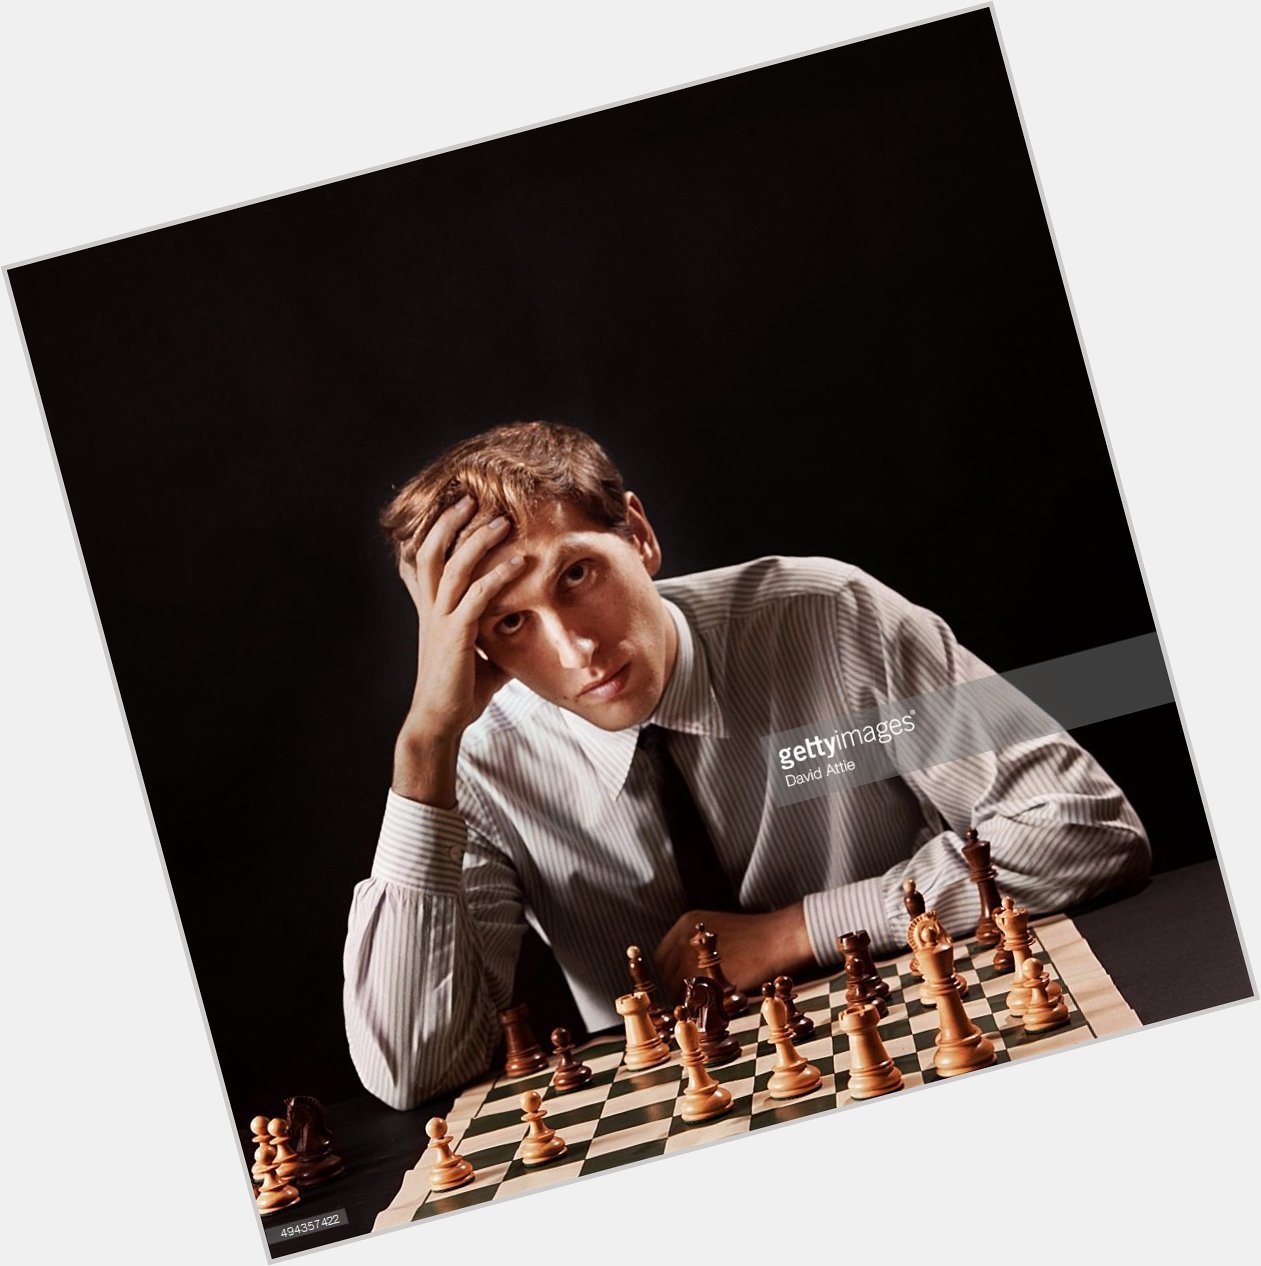 Happy birthday to Bobby Fischer who would have been 74 today :(  